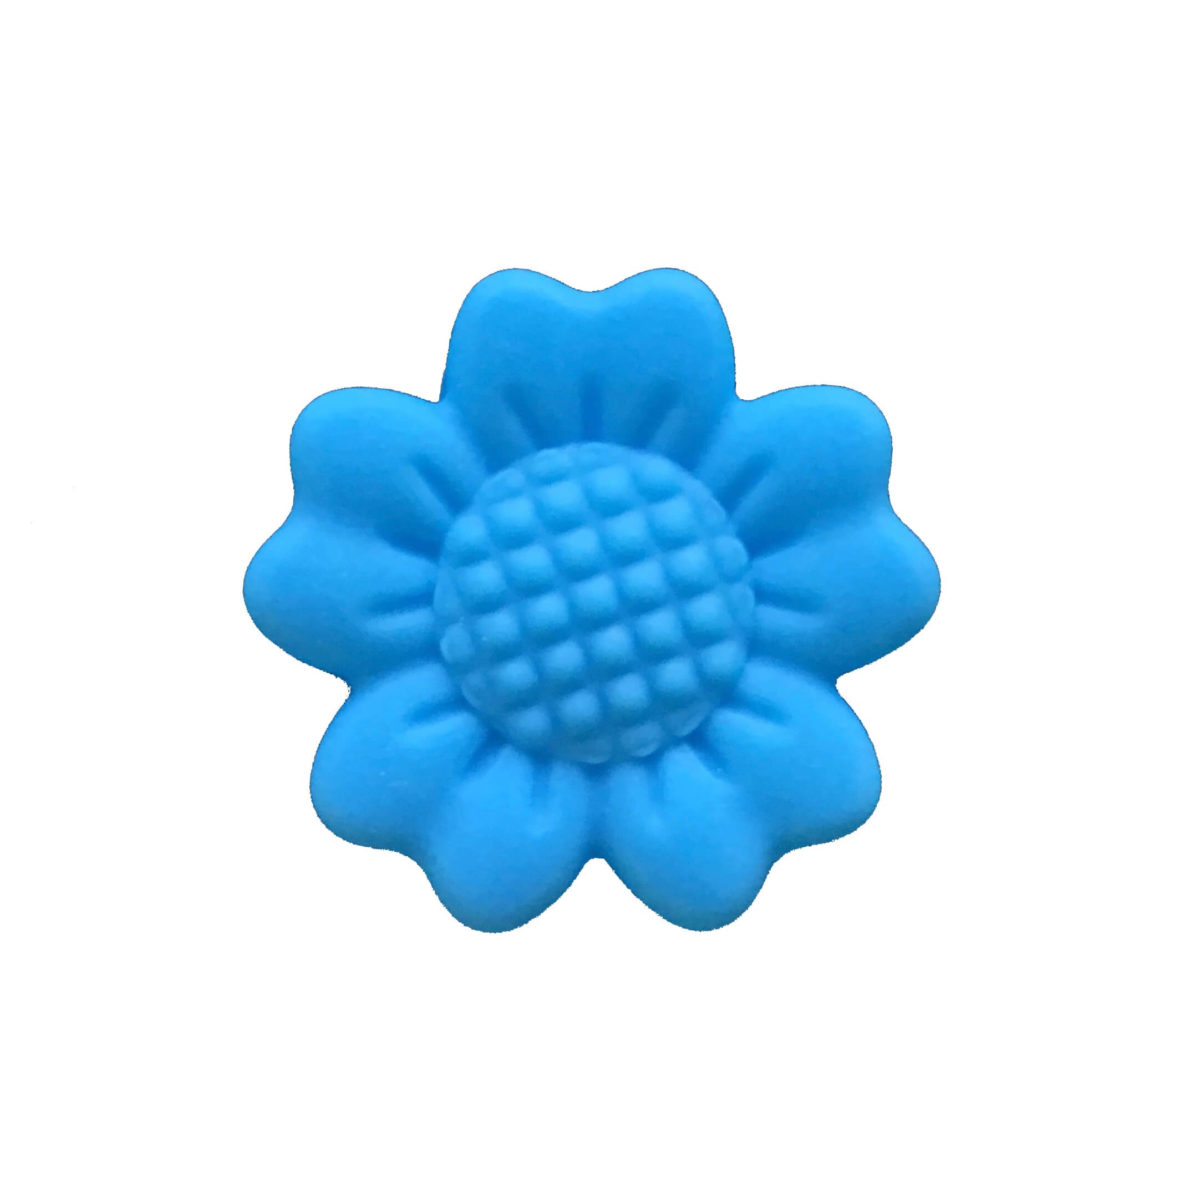 5cm blue sunflower single cavity silicone mould